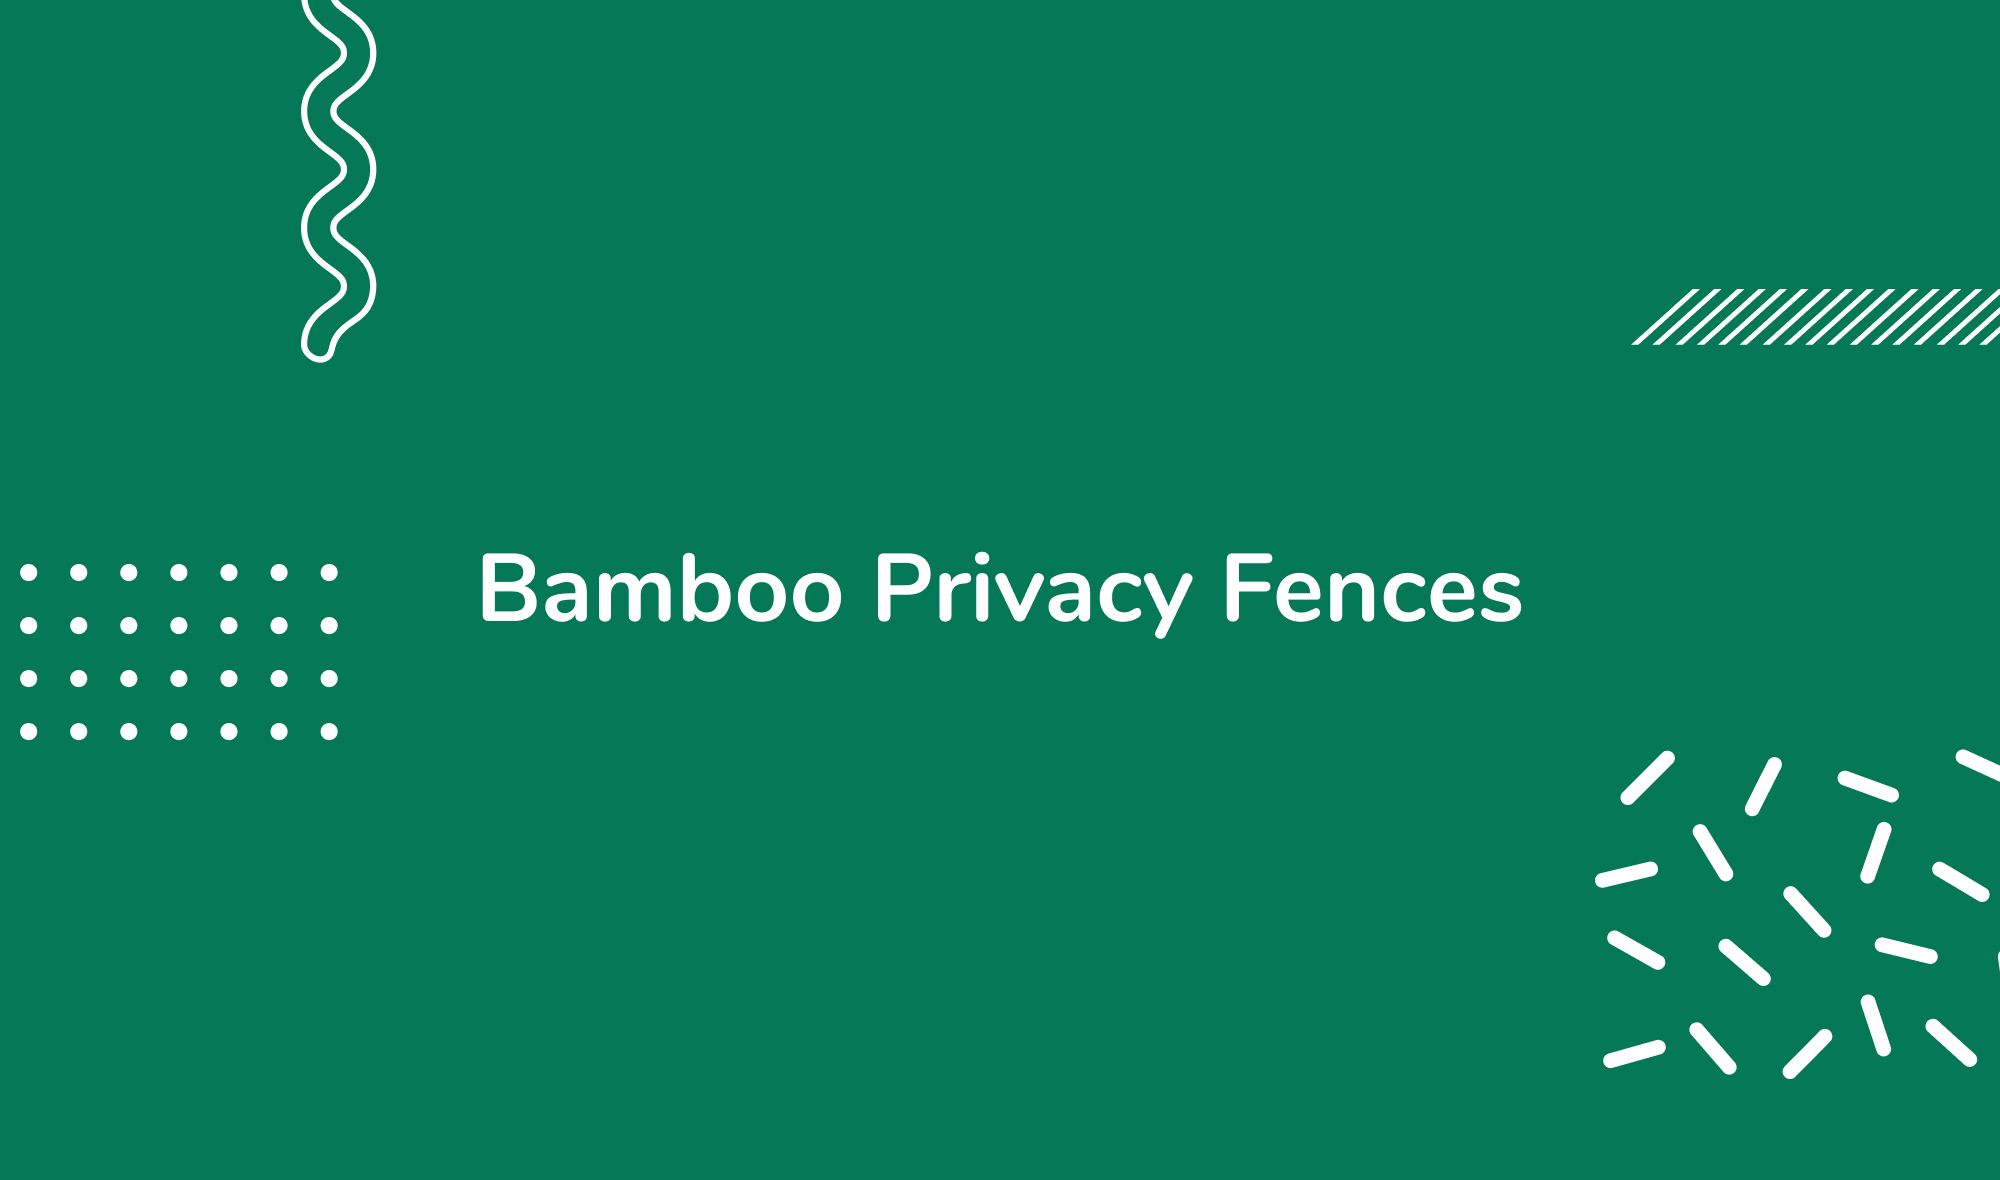 Bamboo Privacy Fences